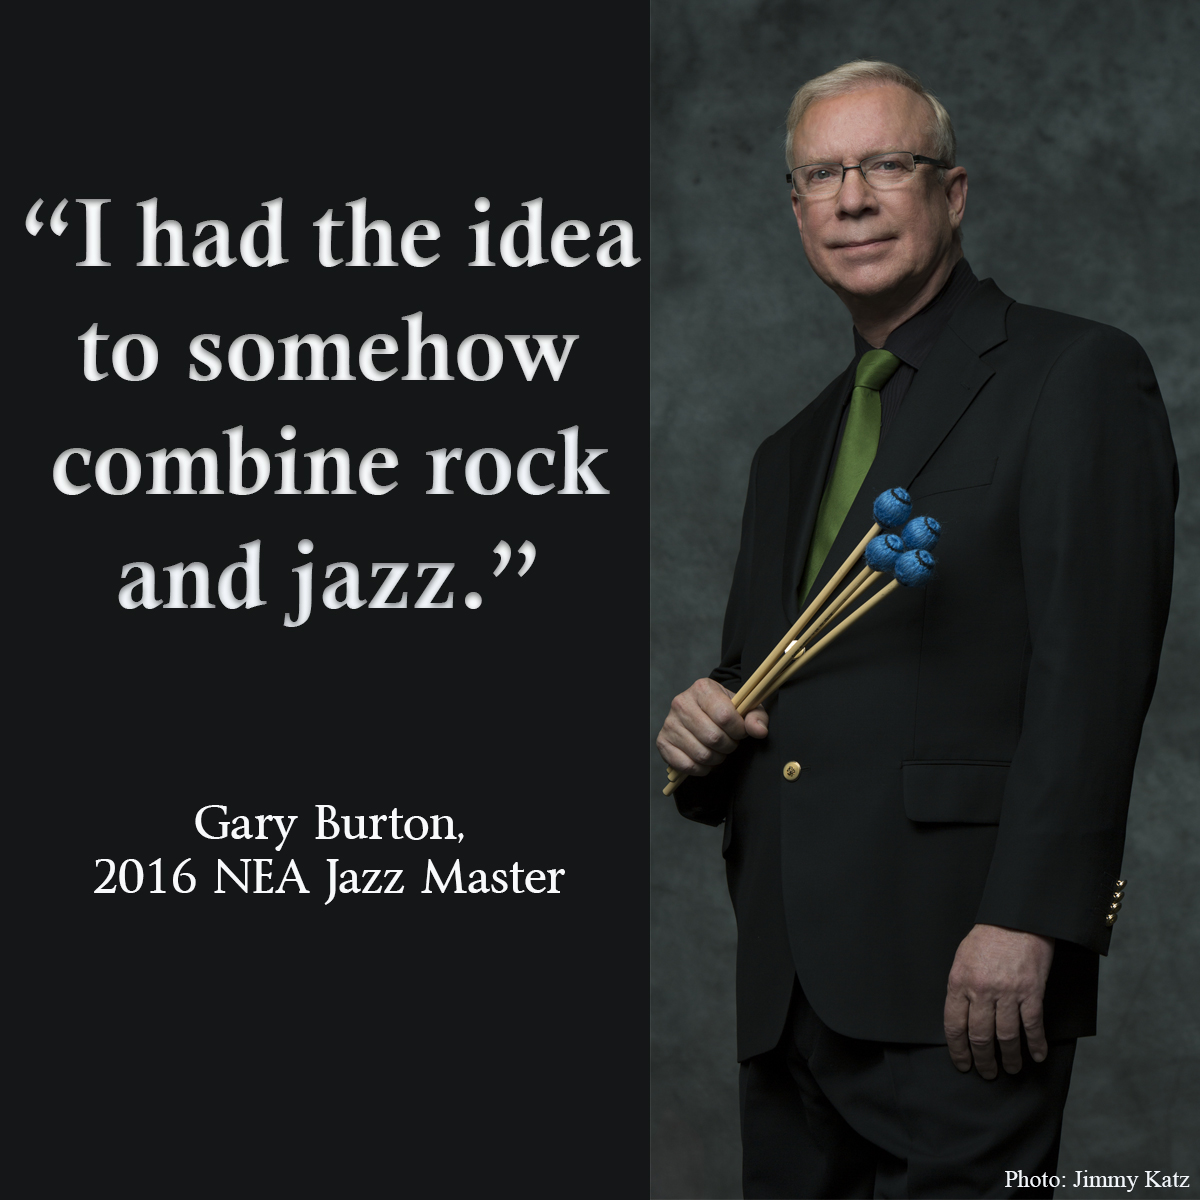 Standing photo of Gary Burton with the quote: “I had the idea to somehow combine rock and jazz.”